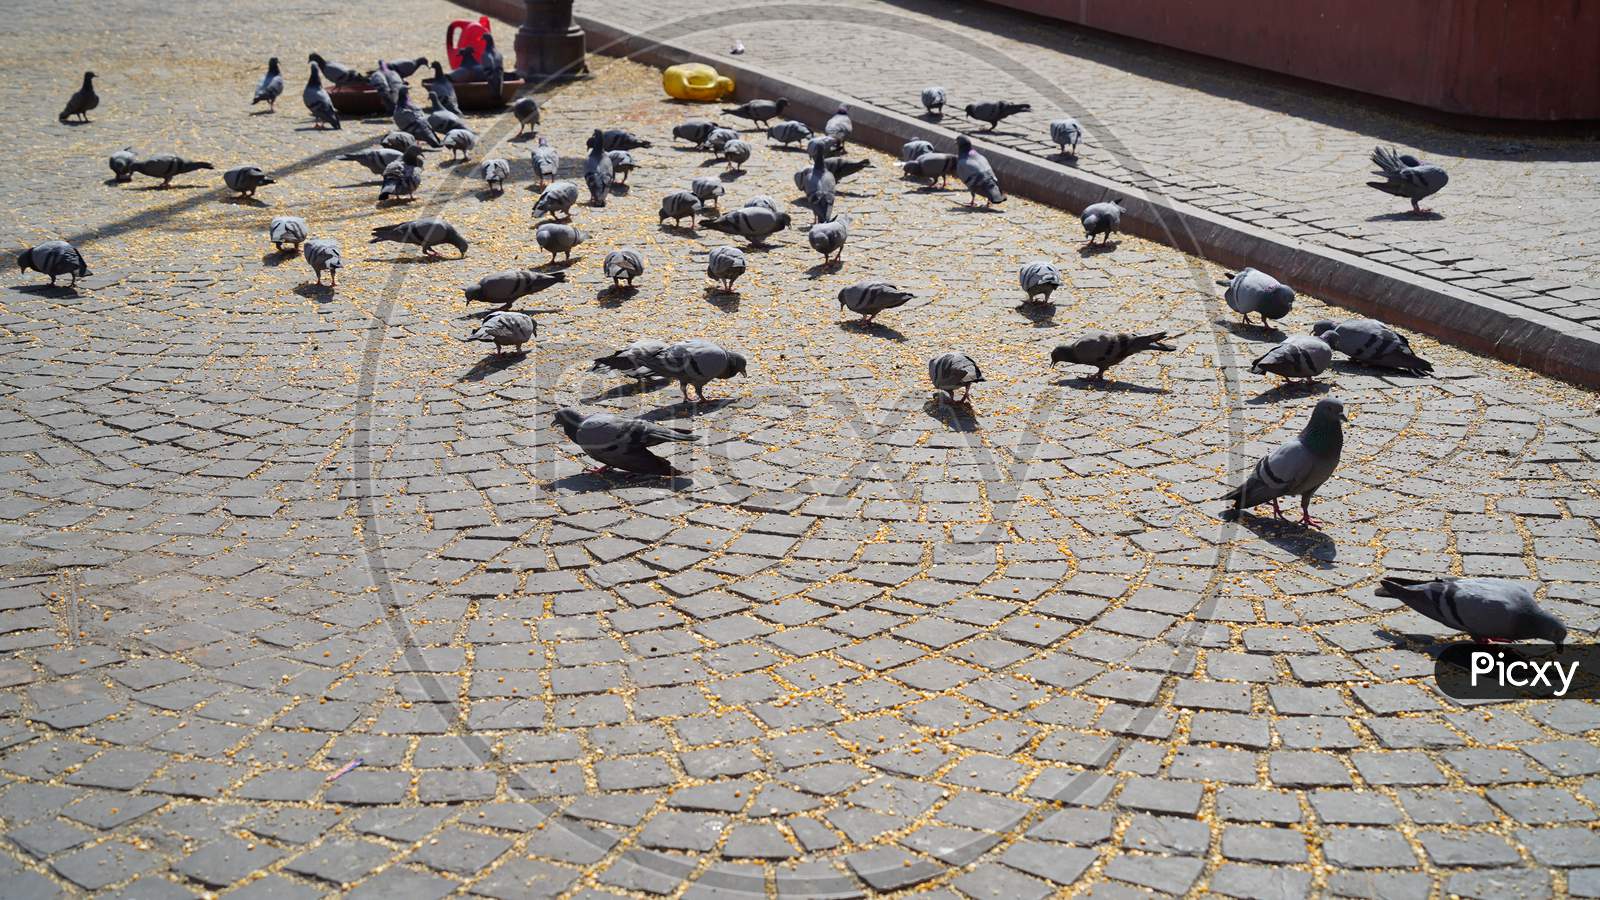 Indian Pigeon Groups Eating Wheat Grains On Ground. Indian Pet Life Concept.